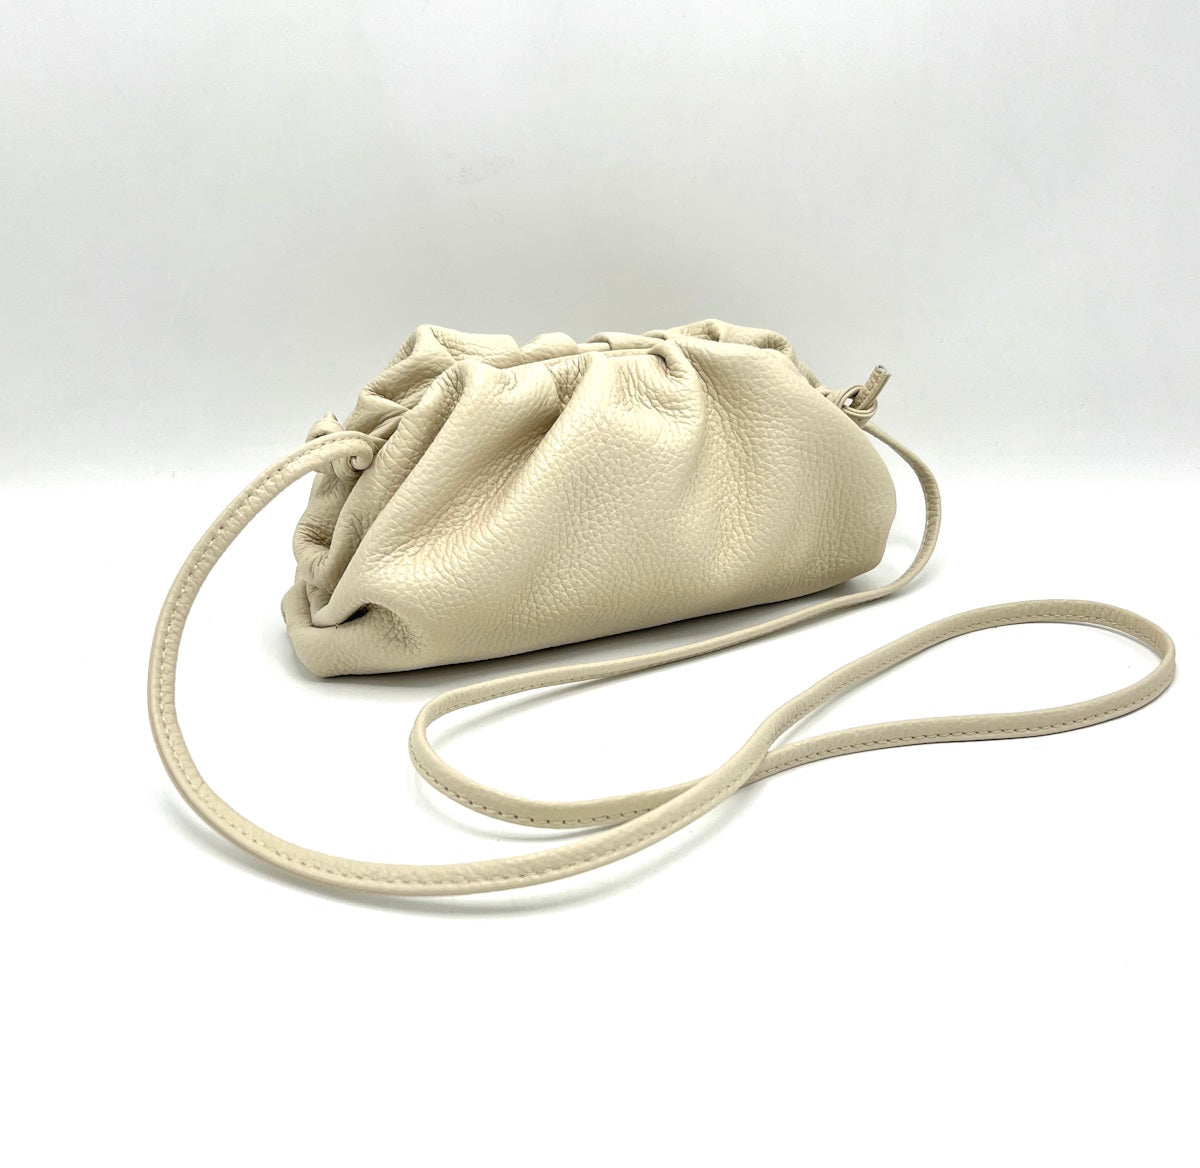 Genuine leather shoulder bag, for women, made in Italy, art. 112406.412